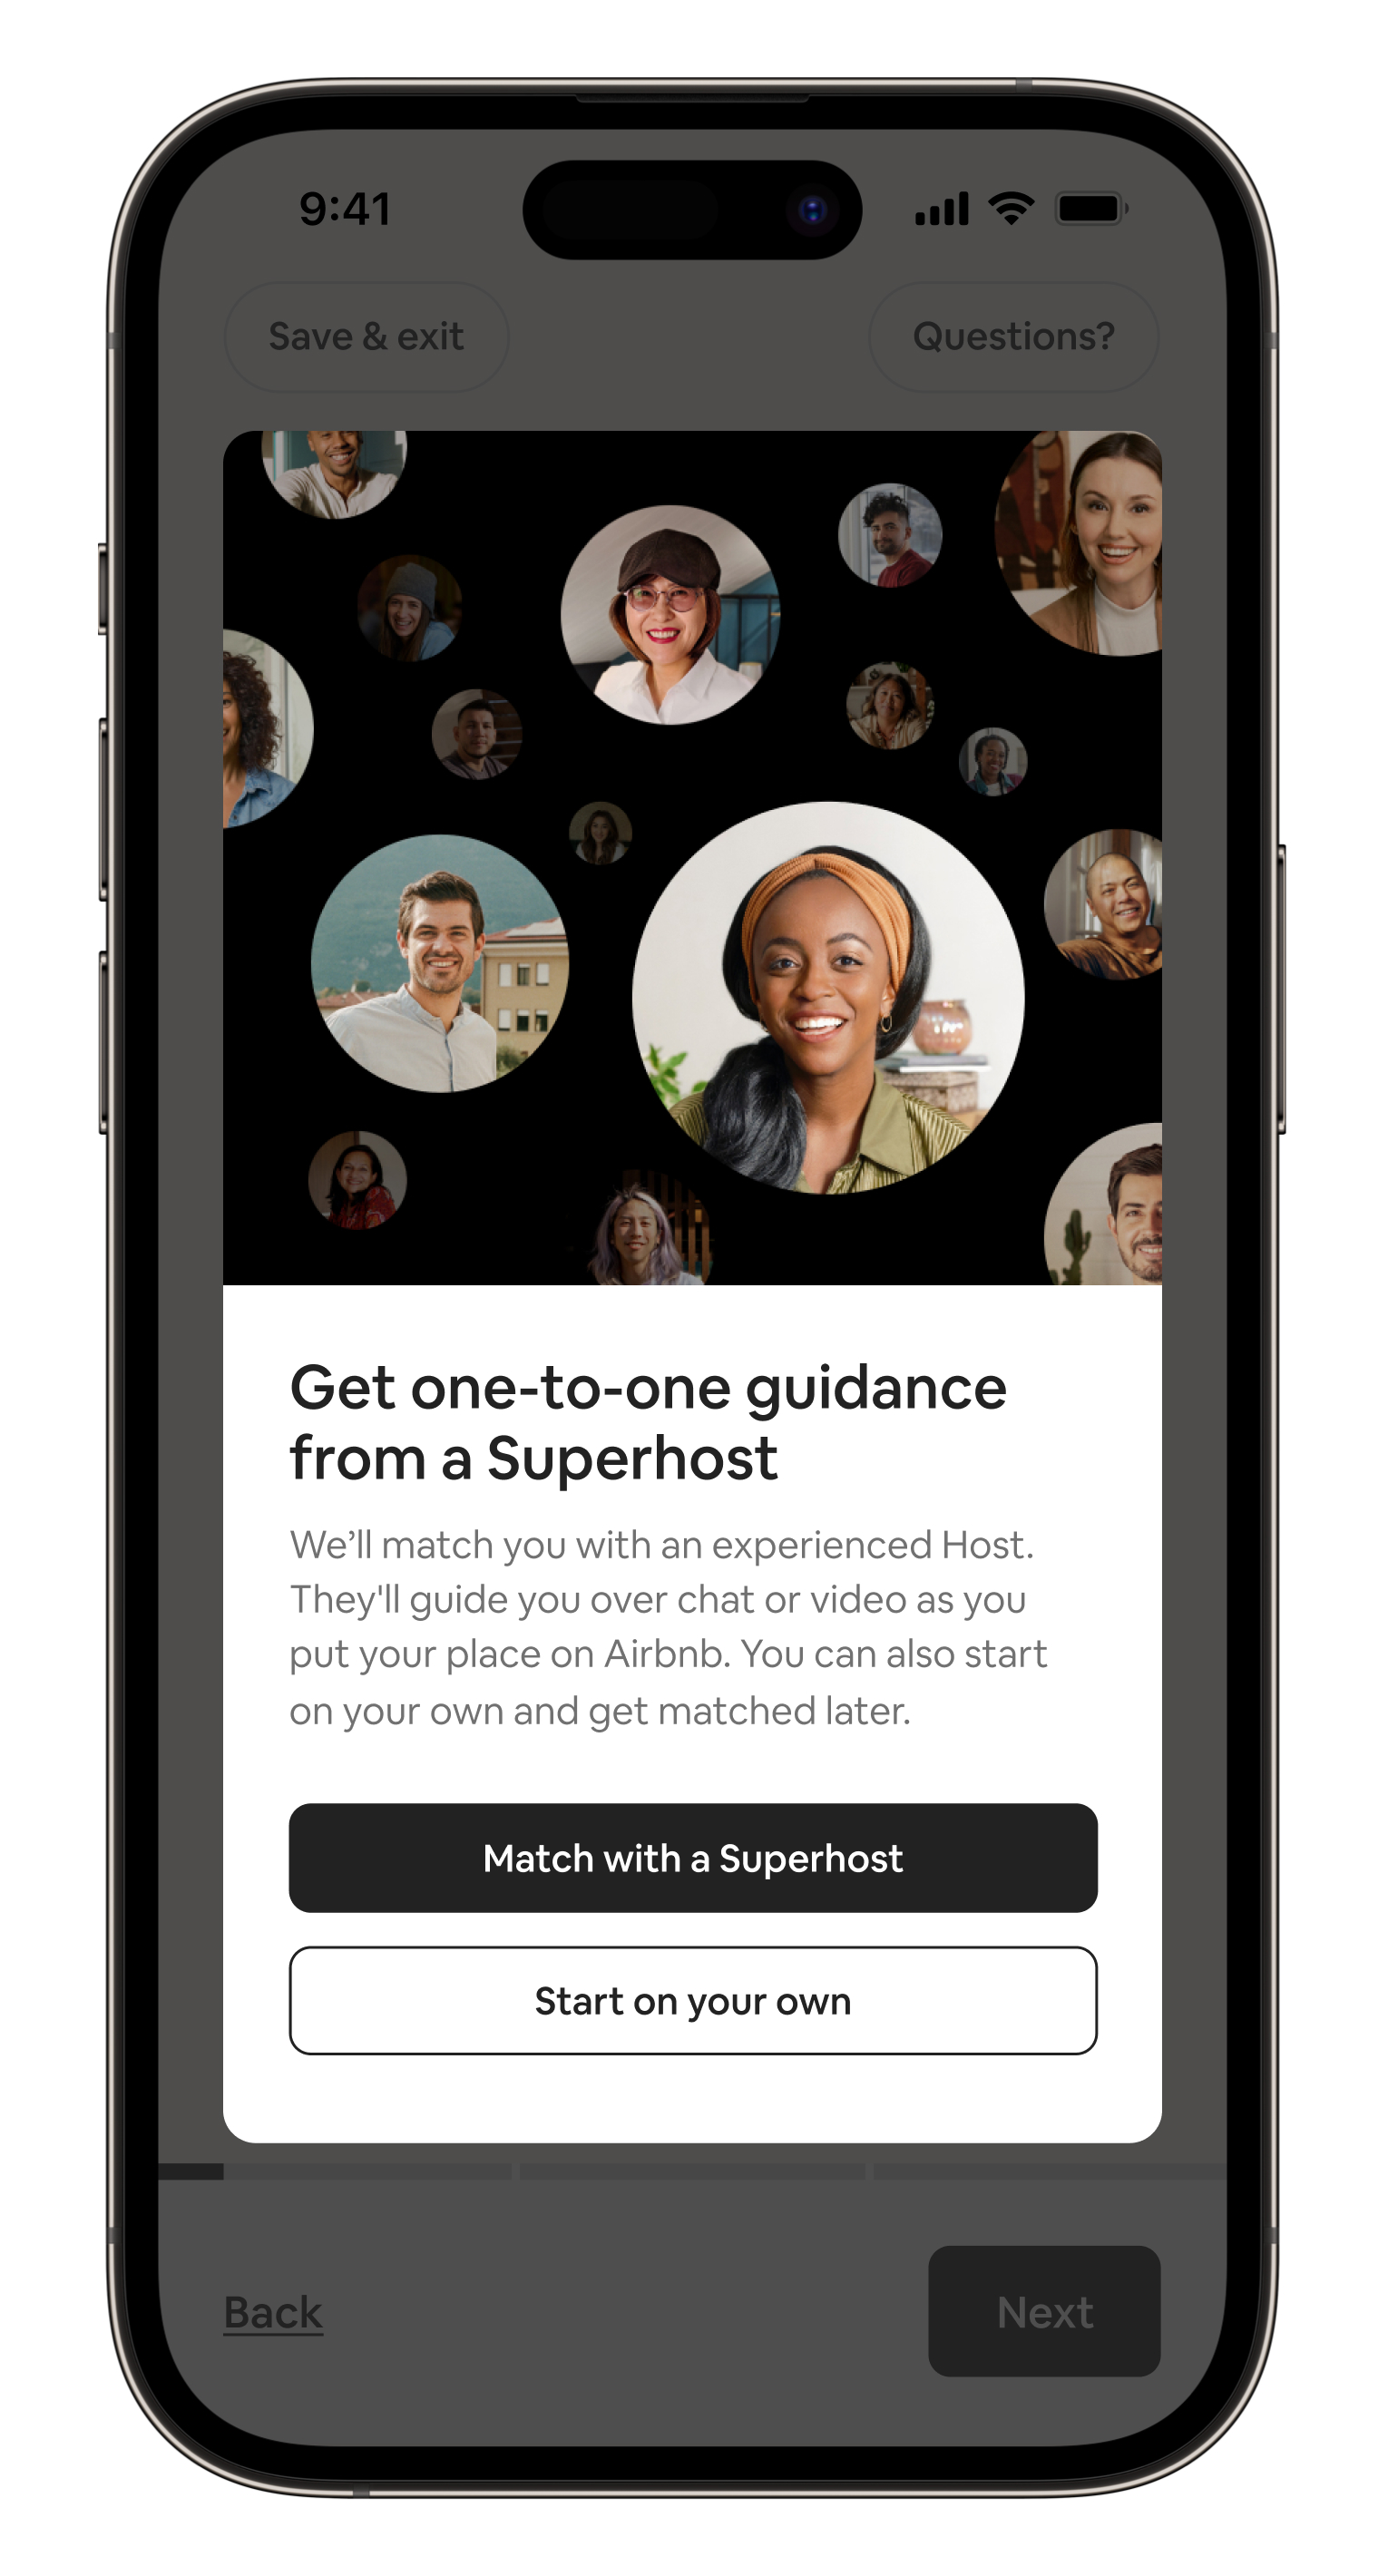 Airbnb Setup featured within the Airbnb app on an iPhone device. The image shows how new Hosts can initiate a conversation with a Superhost to help with setting up their listing.